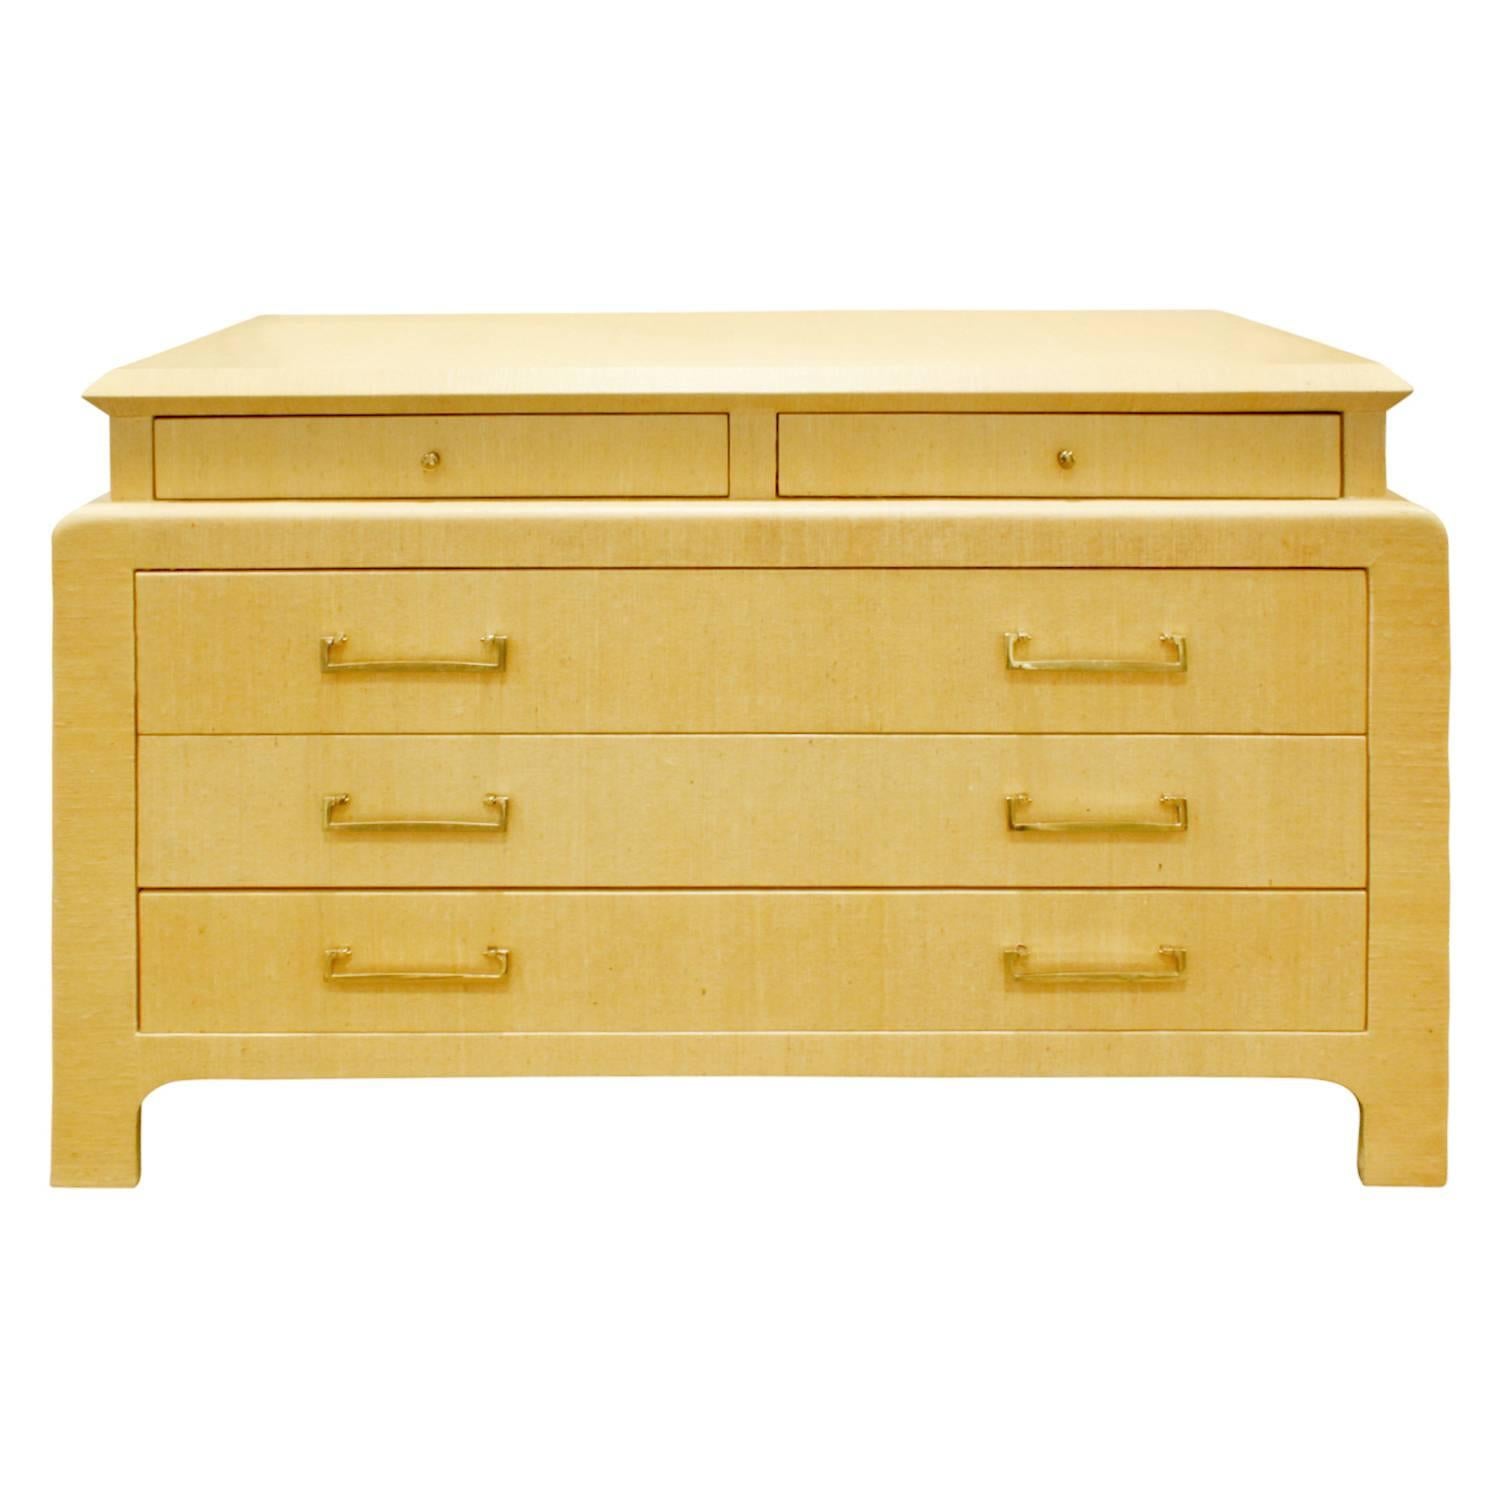 Harrison Van Horn Chest of Drawers in Lacquered Linen, 1970s